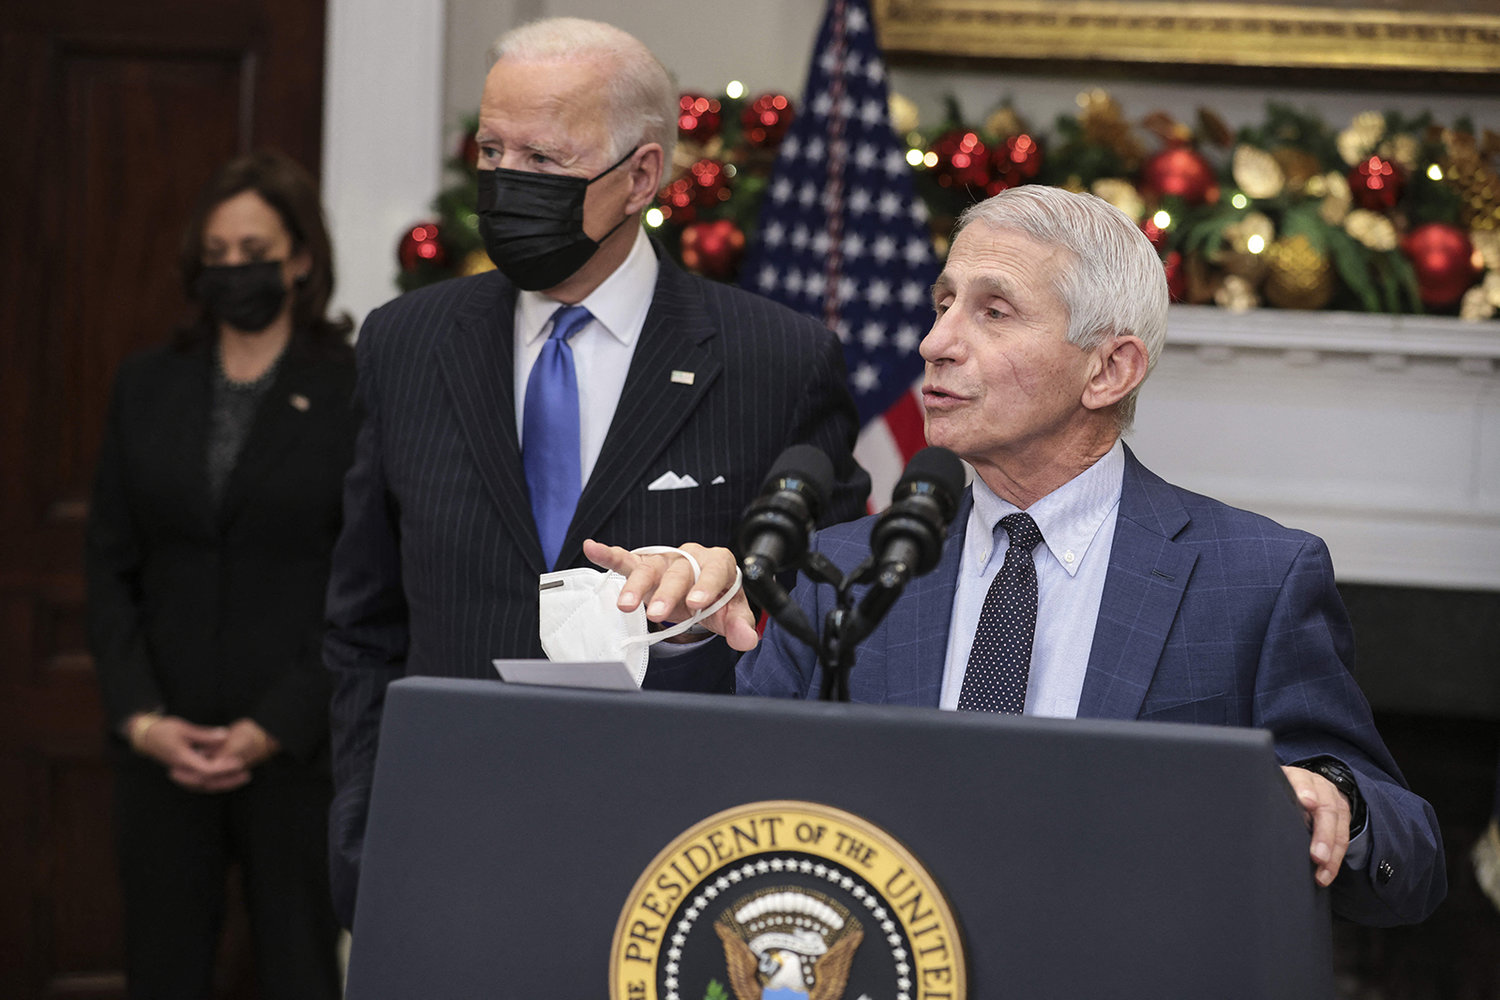 Dr. Anthony Fauci, chief medical adviser to the president, right, joined by U.S. President Joe Biden, center, and Vice President Kamala Harris, left, speaks on the omicron variant in the Roosevelt Room of the White House in Washington, D.C., on Nov. 29, 2021. (Oliver Contreras/Pool/ABACAPRESS.COM/TNS)